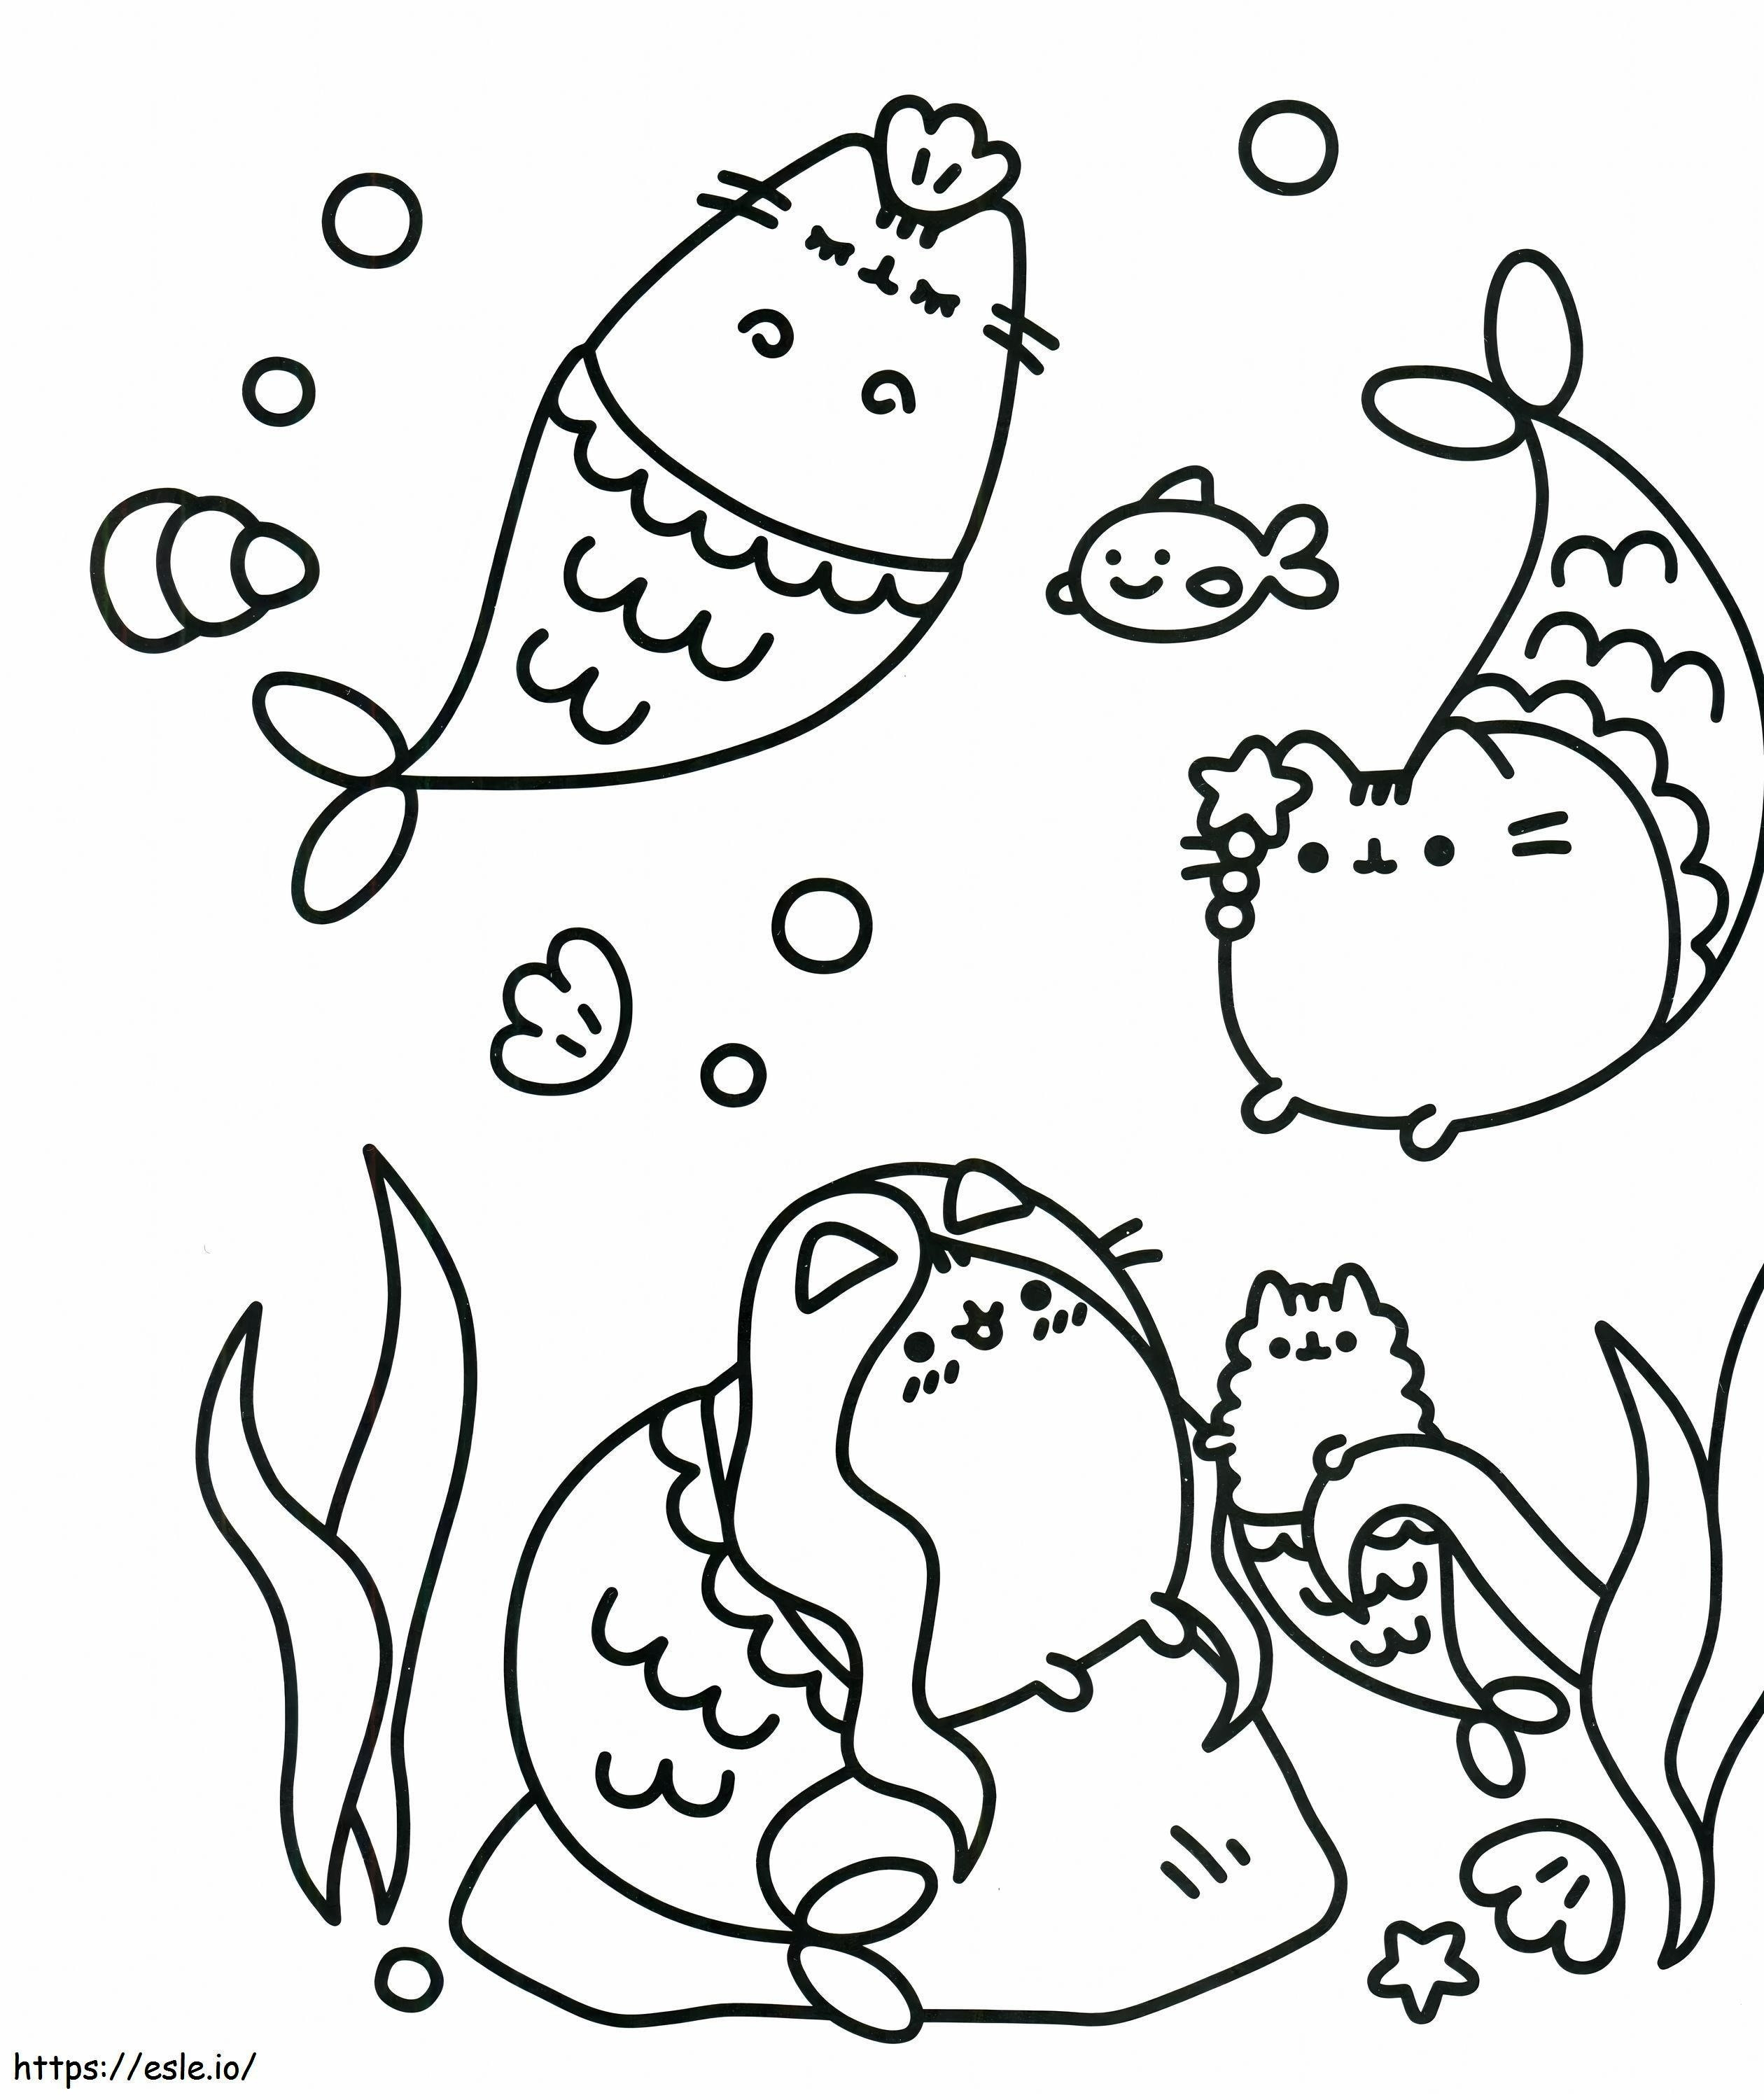 1541488746 Hurry Pusheen New Best Friends Scaled 2 coloring page